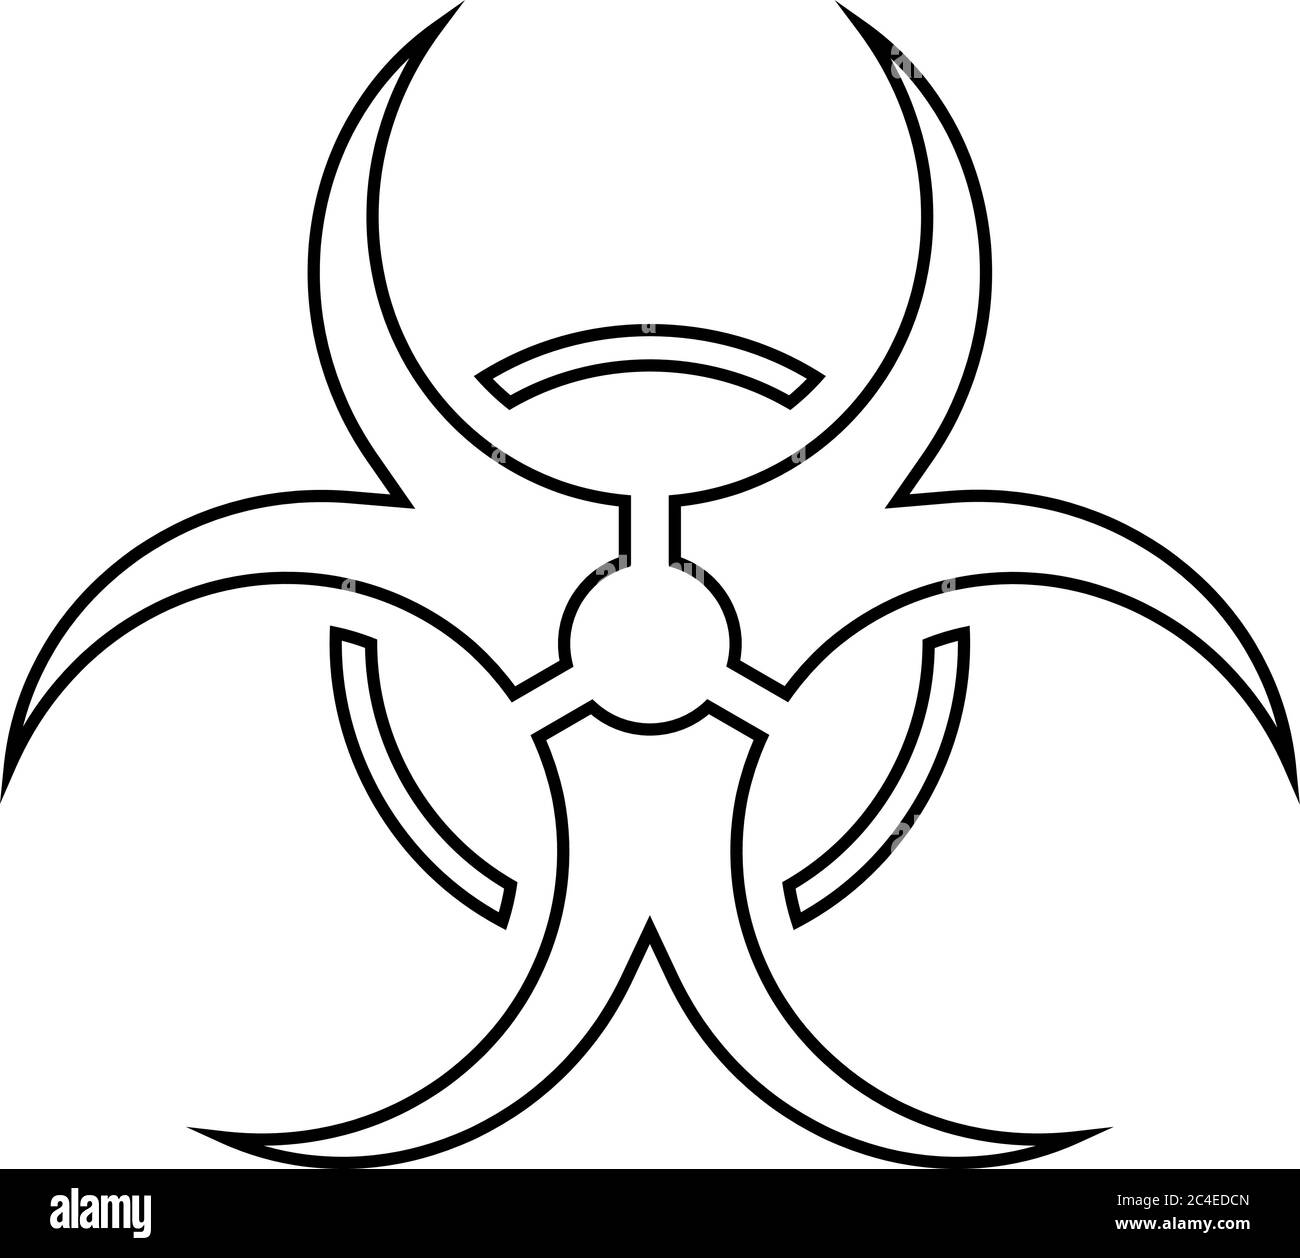 Biohazard caution sign. Symbol of hazard caused by biological microorganism, virus or toxin. Simple flat vector illustration in white with black outline. Stock Vector